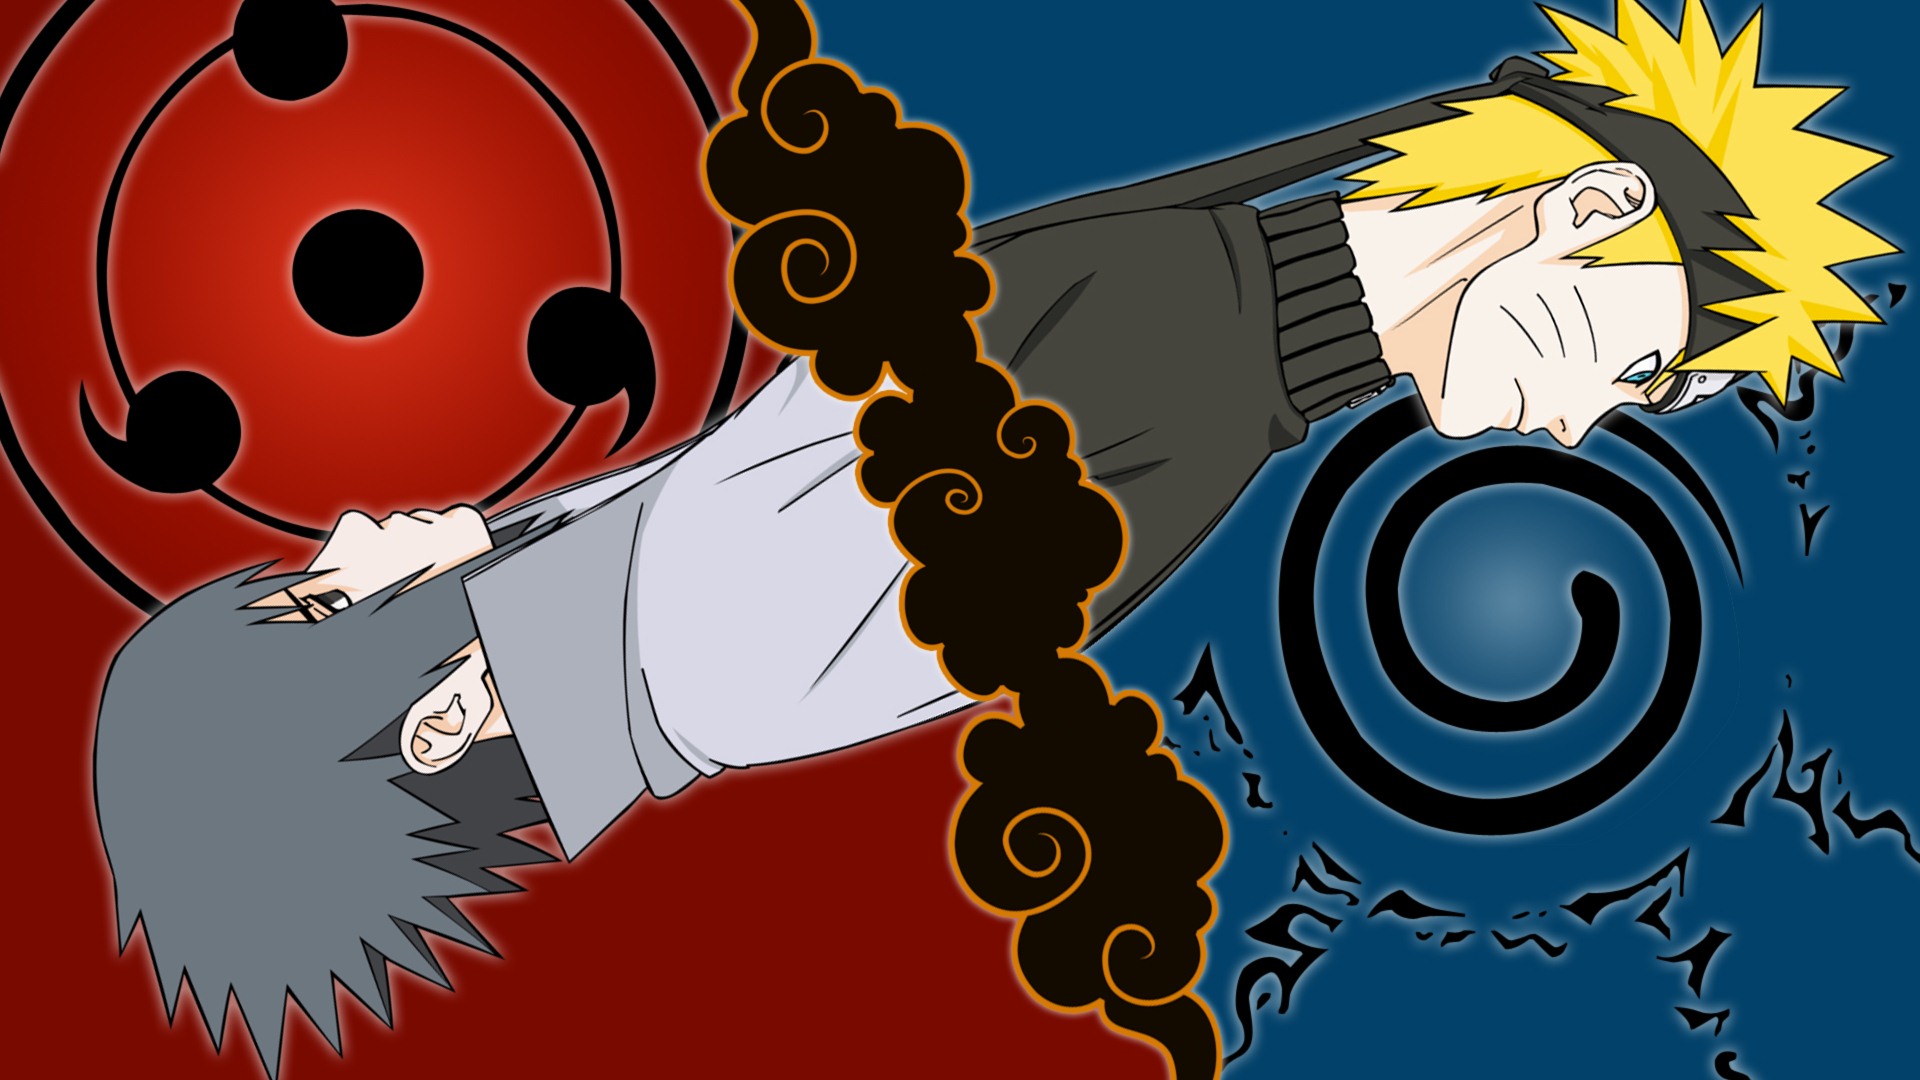 46+ Naruto Wallpapers for Desktop 1920x1080 on ...